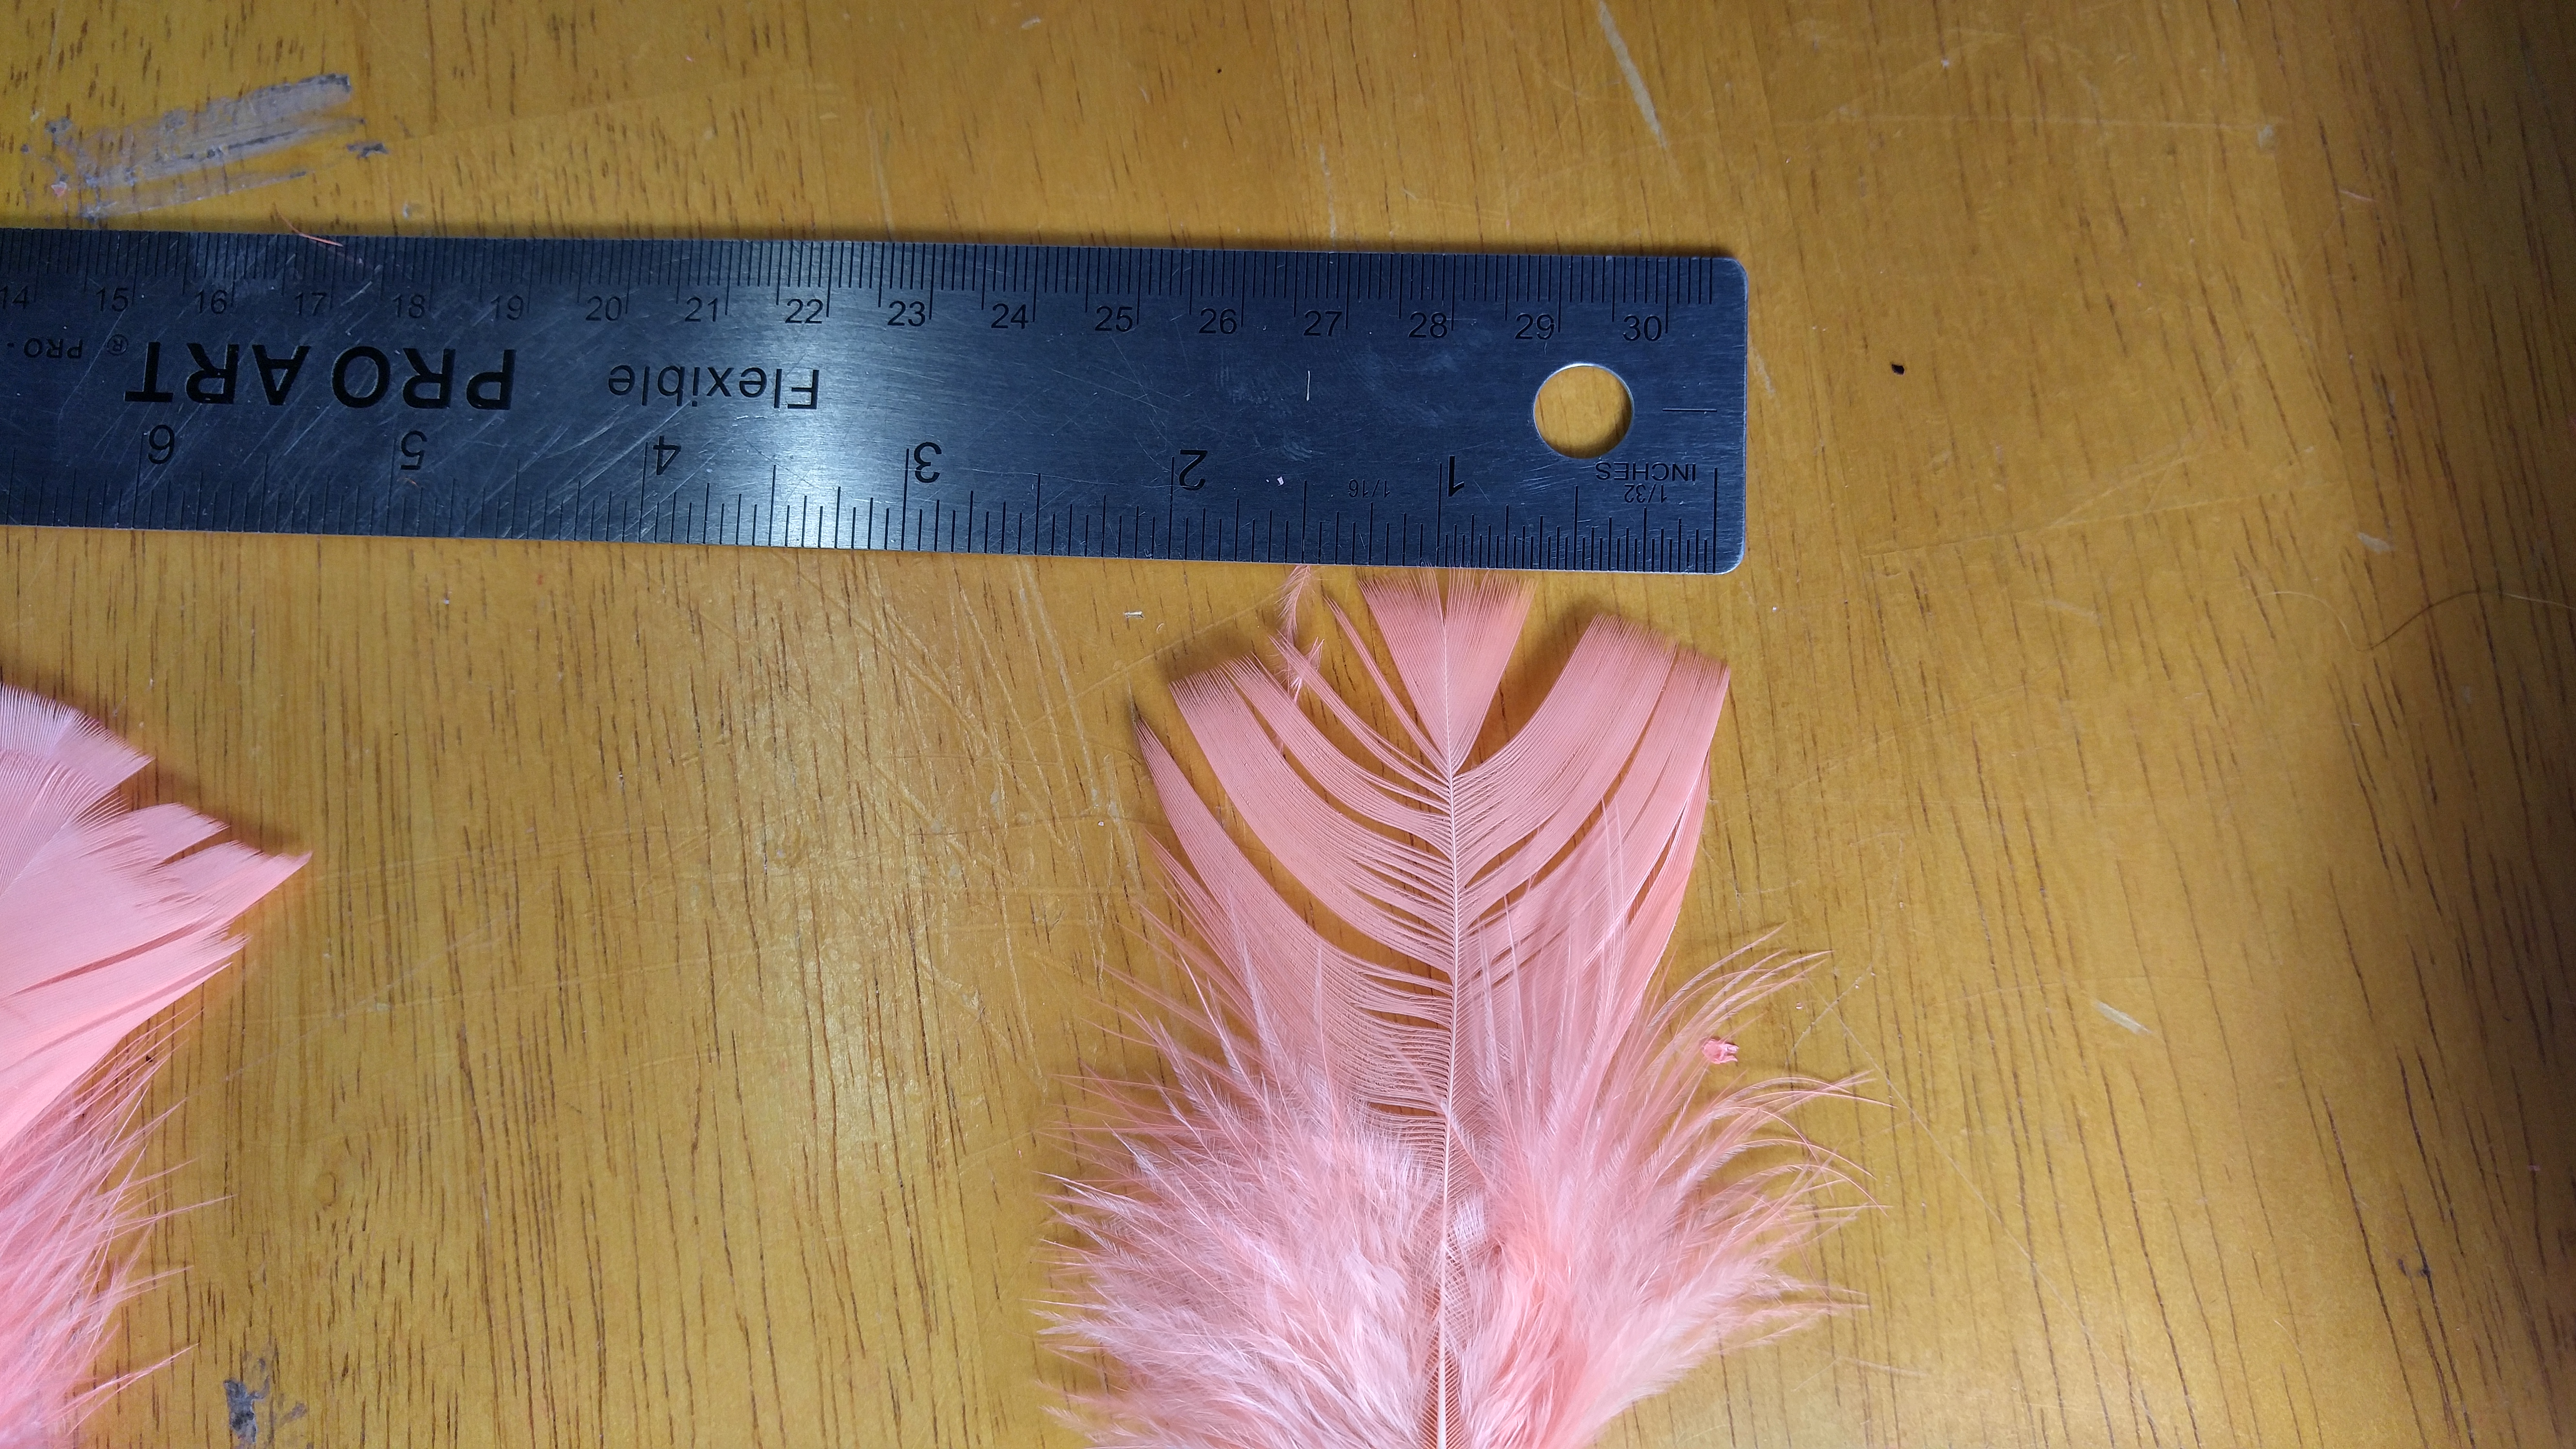 1inch to 1.5 inch fiber lengths measuring from tip of fiber to stem.